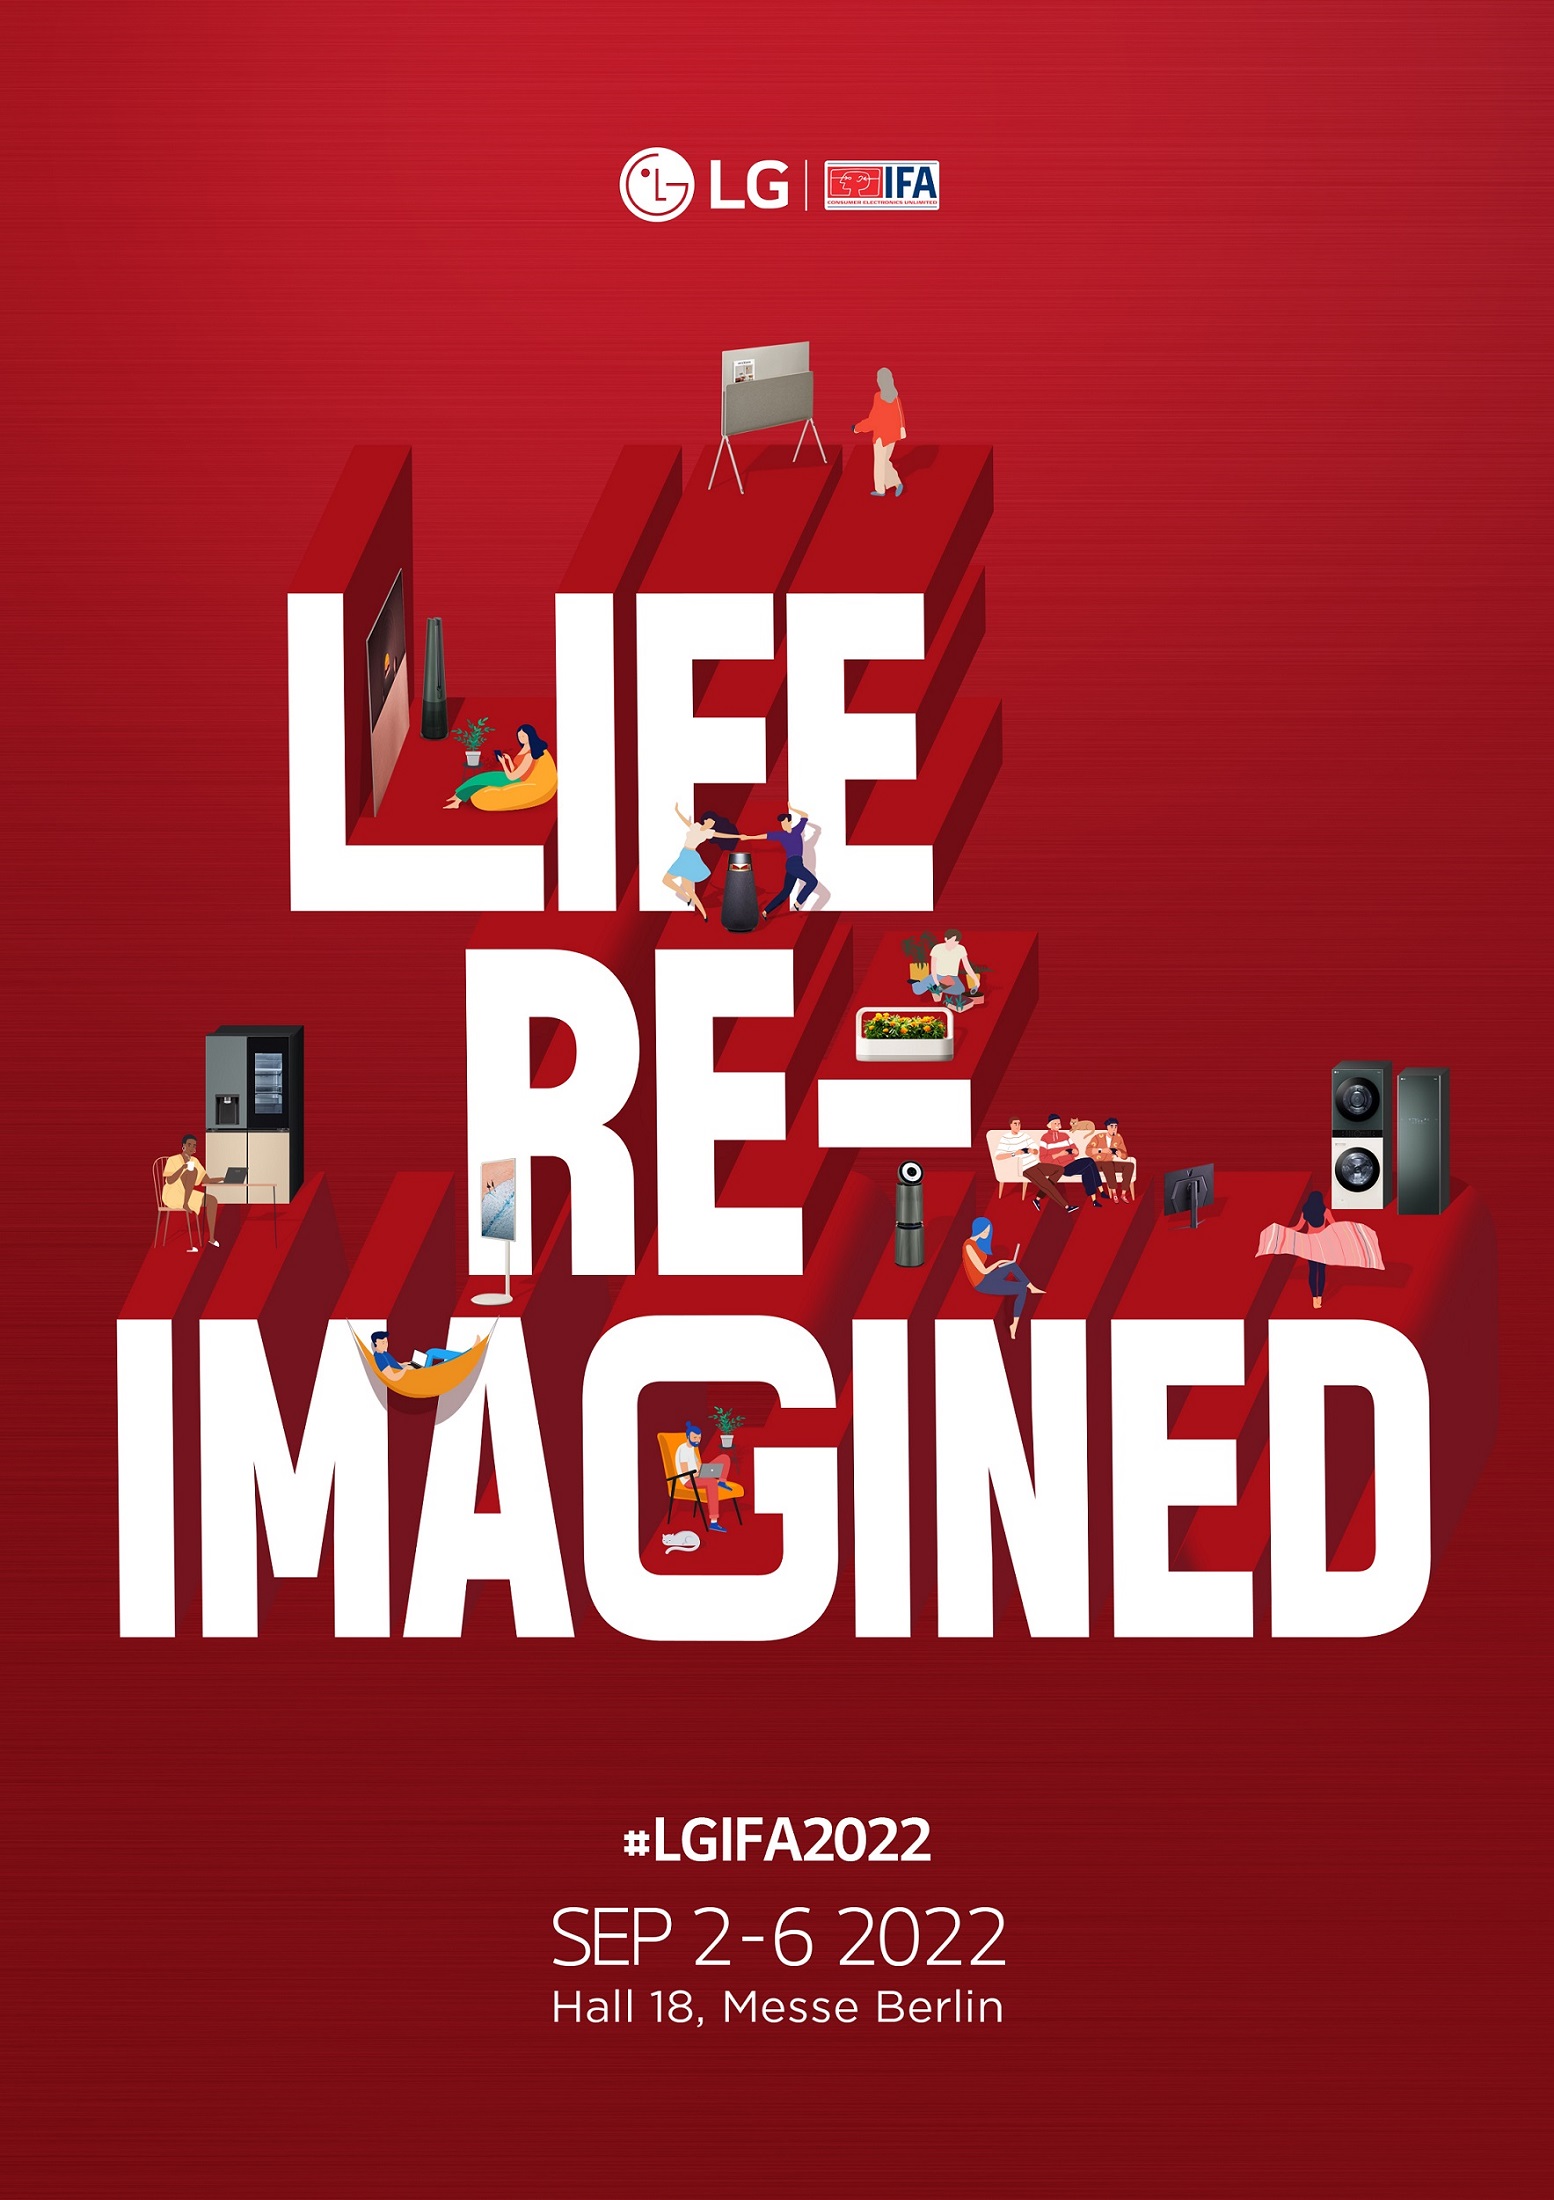 The main promotional image of LG for IFA 2022